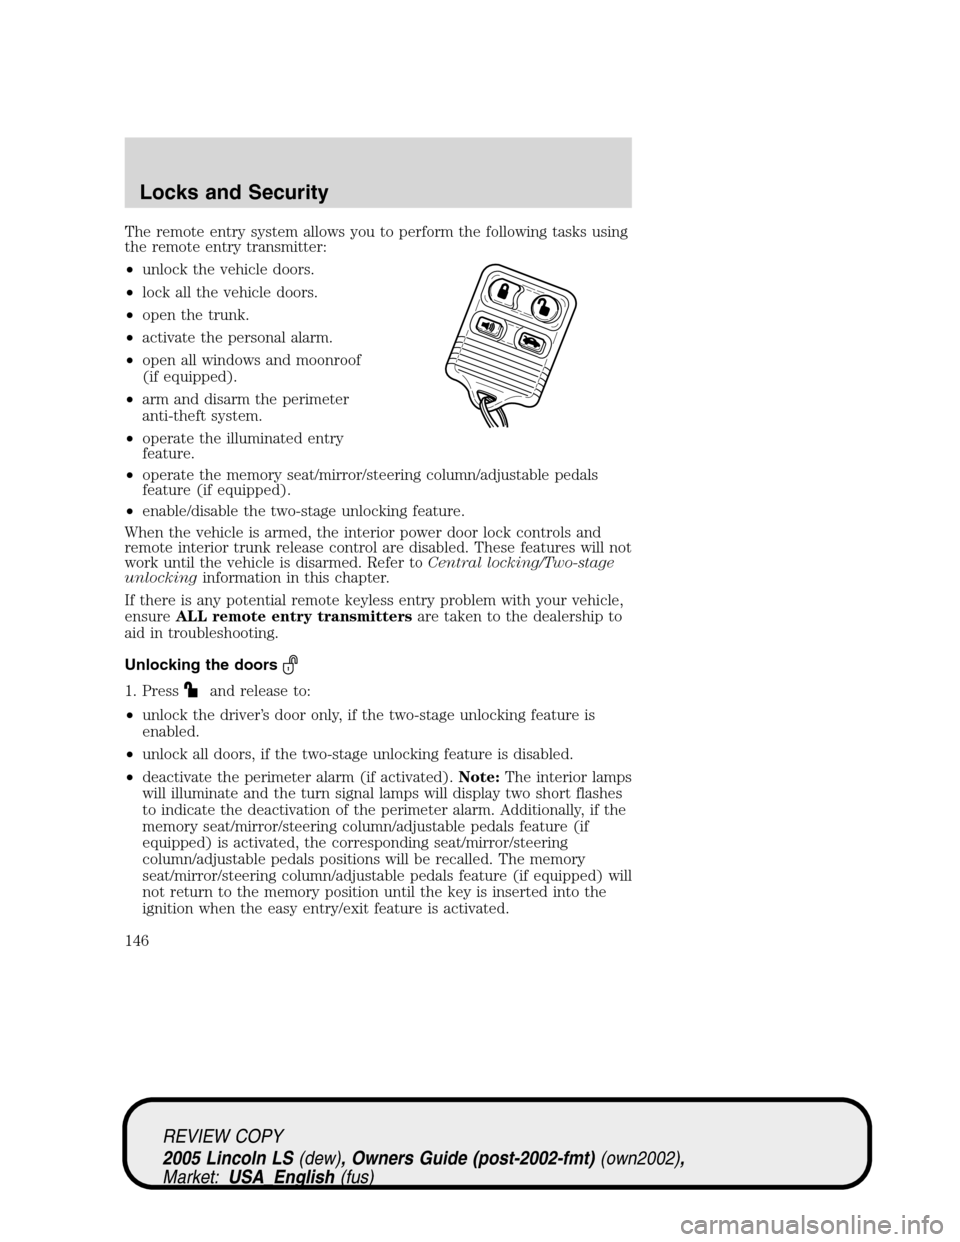 LINCOLN LS 2005  Owners Manual The remote entry system allows you to perform the following tasks using
the remote entry transmitter:
•unlock the vehicle doors.
•lock all the vehicle doors.
•open the trunk.
•activate the per